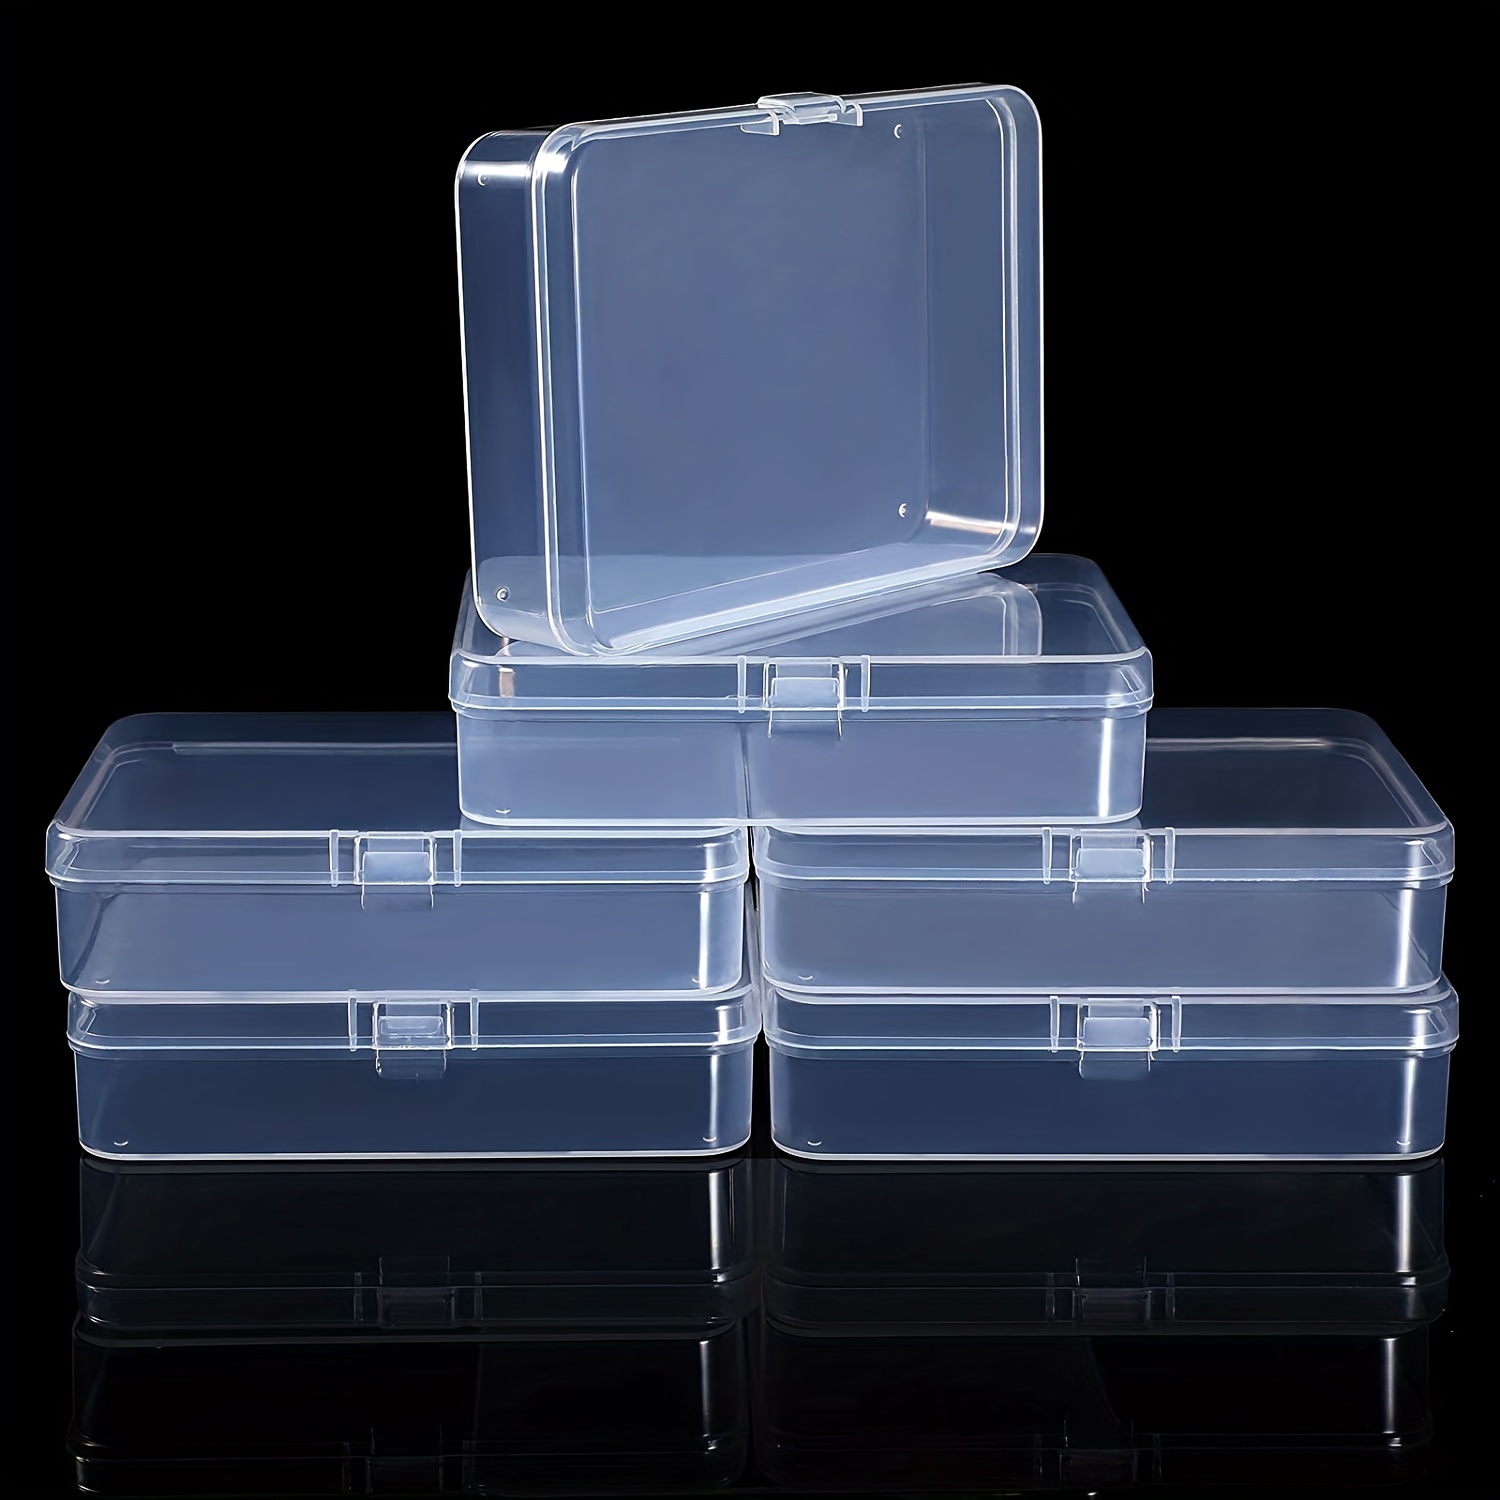 4pcs Plastic Transparent Beads Storage Container Box For Collecting Small  Items, Beads, Jewelry, Cards, Stickers And Other Crafts Portable Storage Box